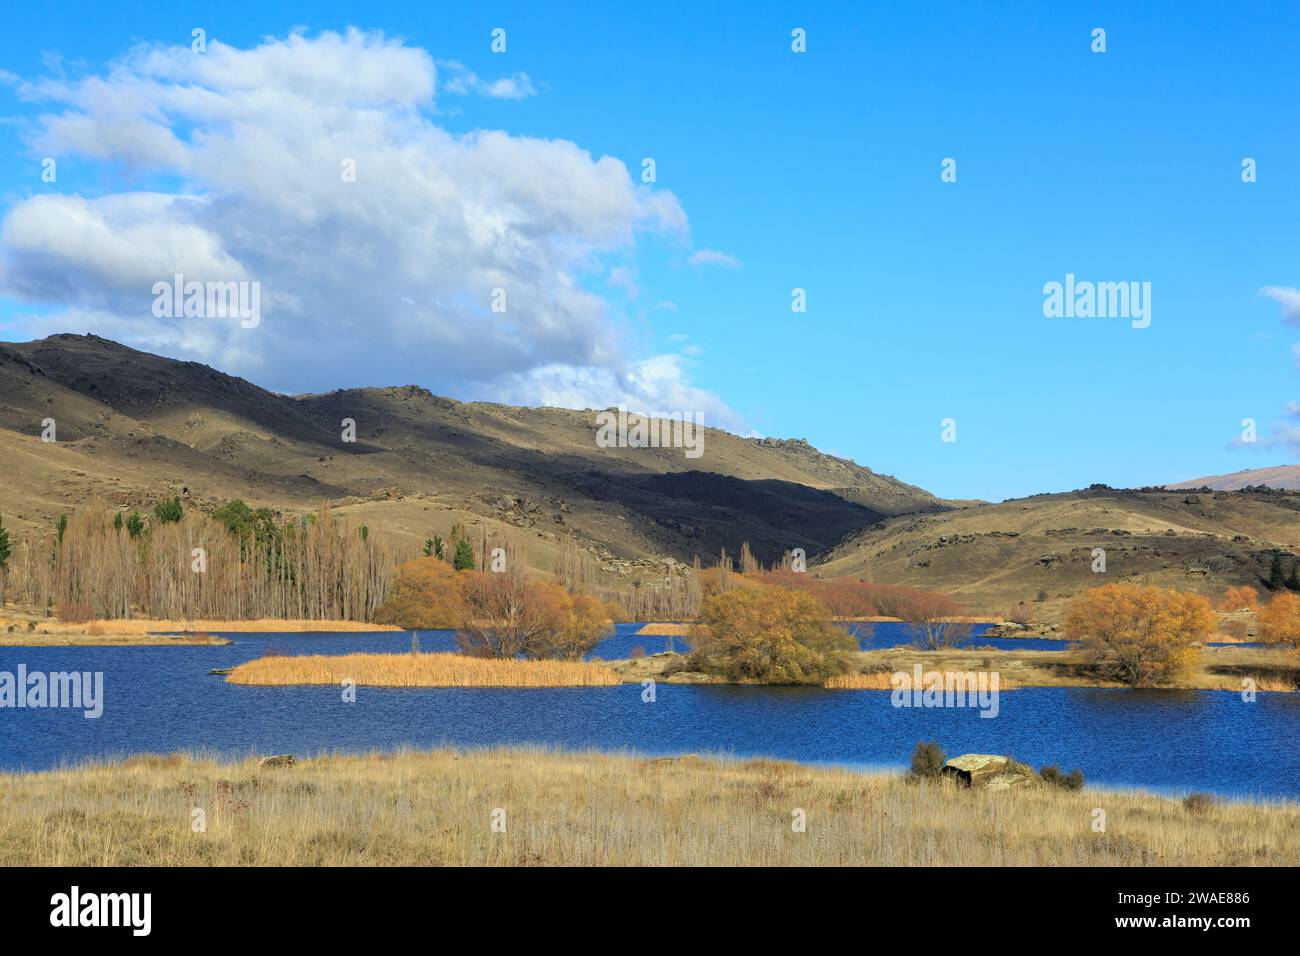 An autumn landscape with colorful trees around a lake in the Flat Top Hill Conservation Area, Central Otago, New Zealand Stock Photo